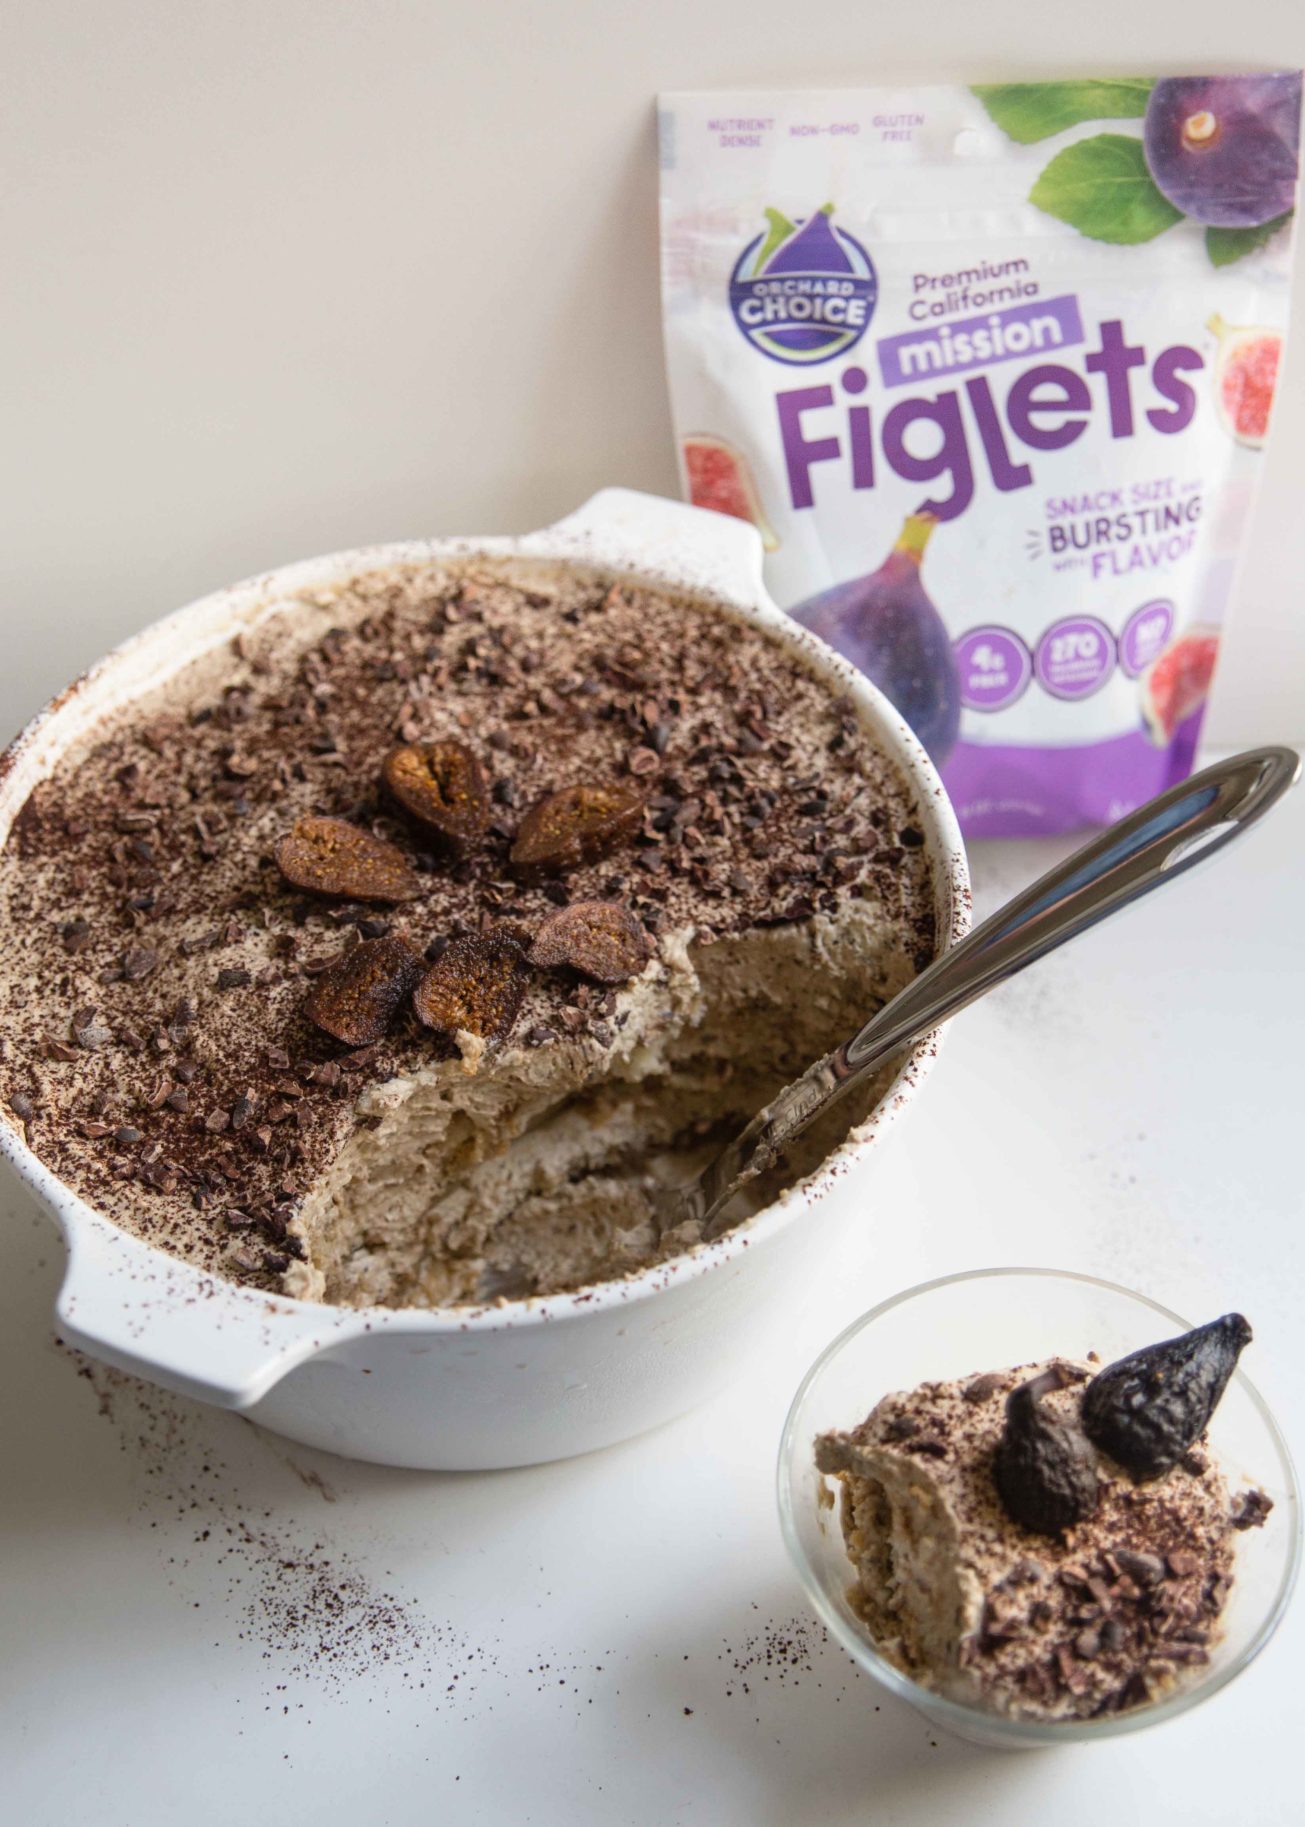 A bowl of an authentic tiramisu recipe and glass cup of fig tiramisu with a bag of Orchard Choice Figlets